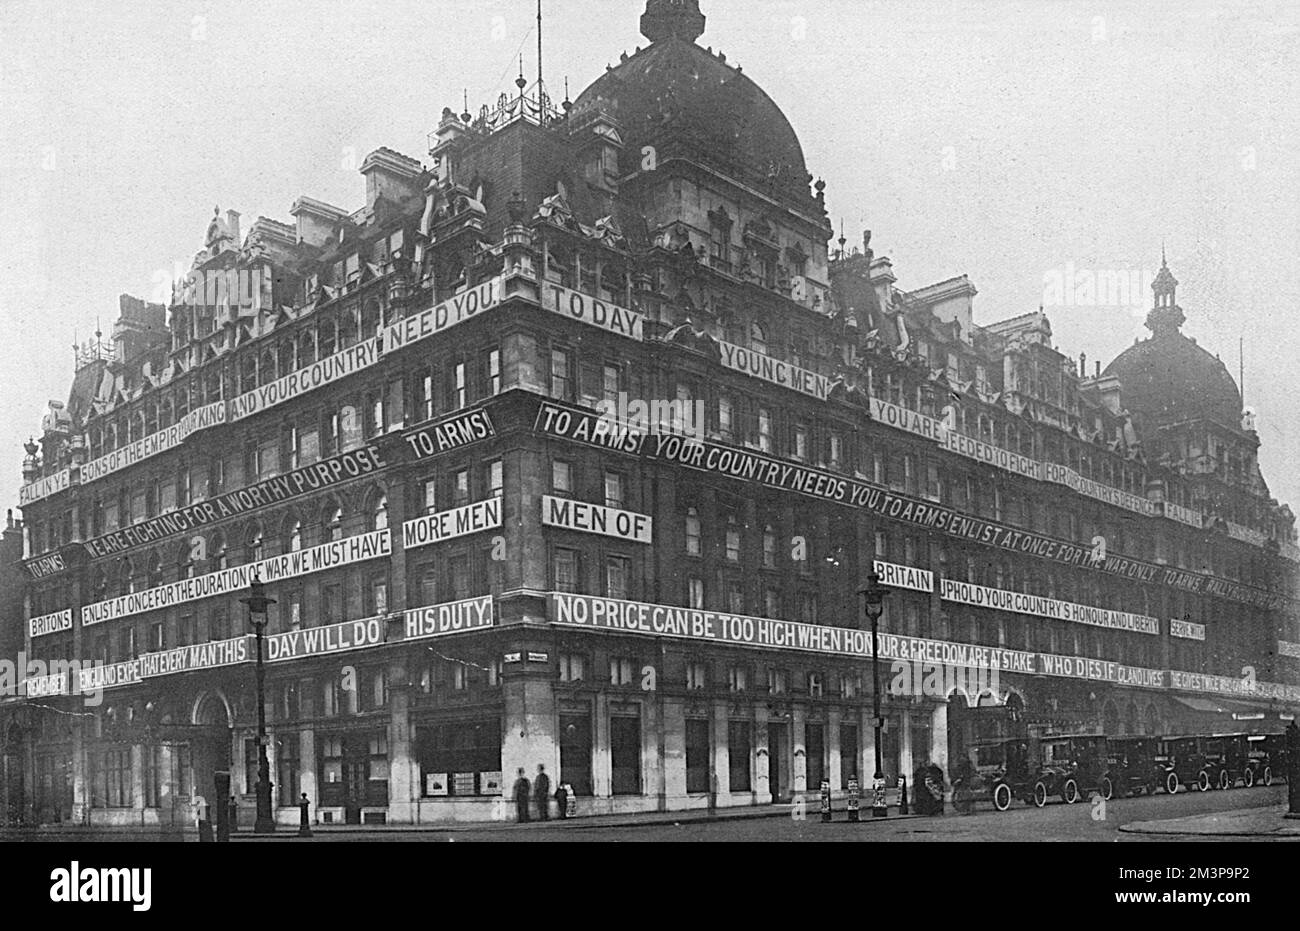 The facade of the Carlton Hotel (ceased operating in 1940), on the corner of Haymarket and Pall Mall in London, bedecked with recruiting slogans for the First World War.     Date: 1914 Stock Photo